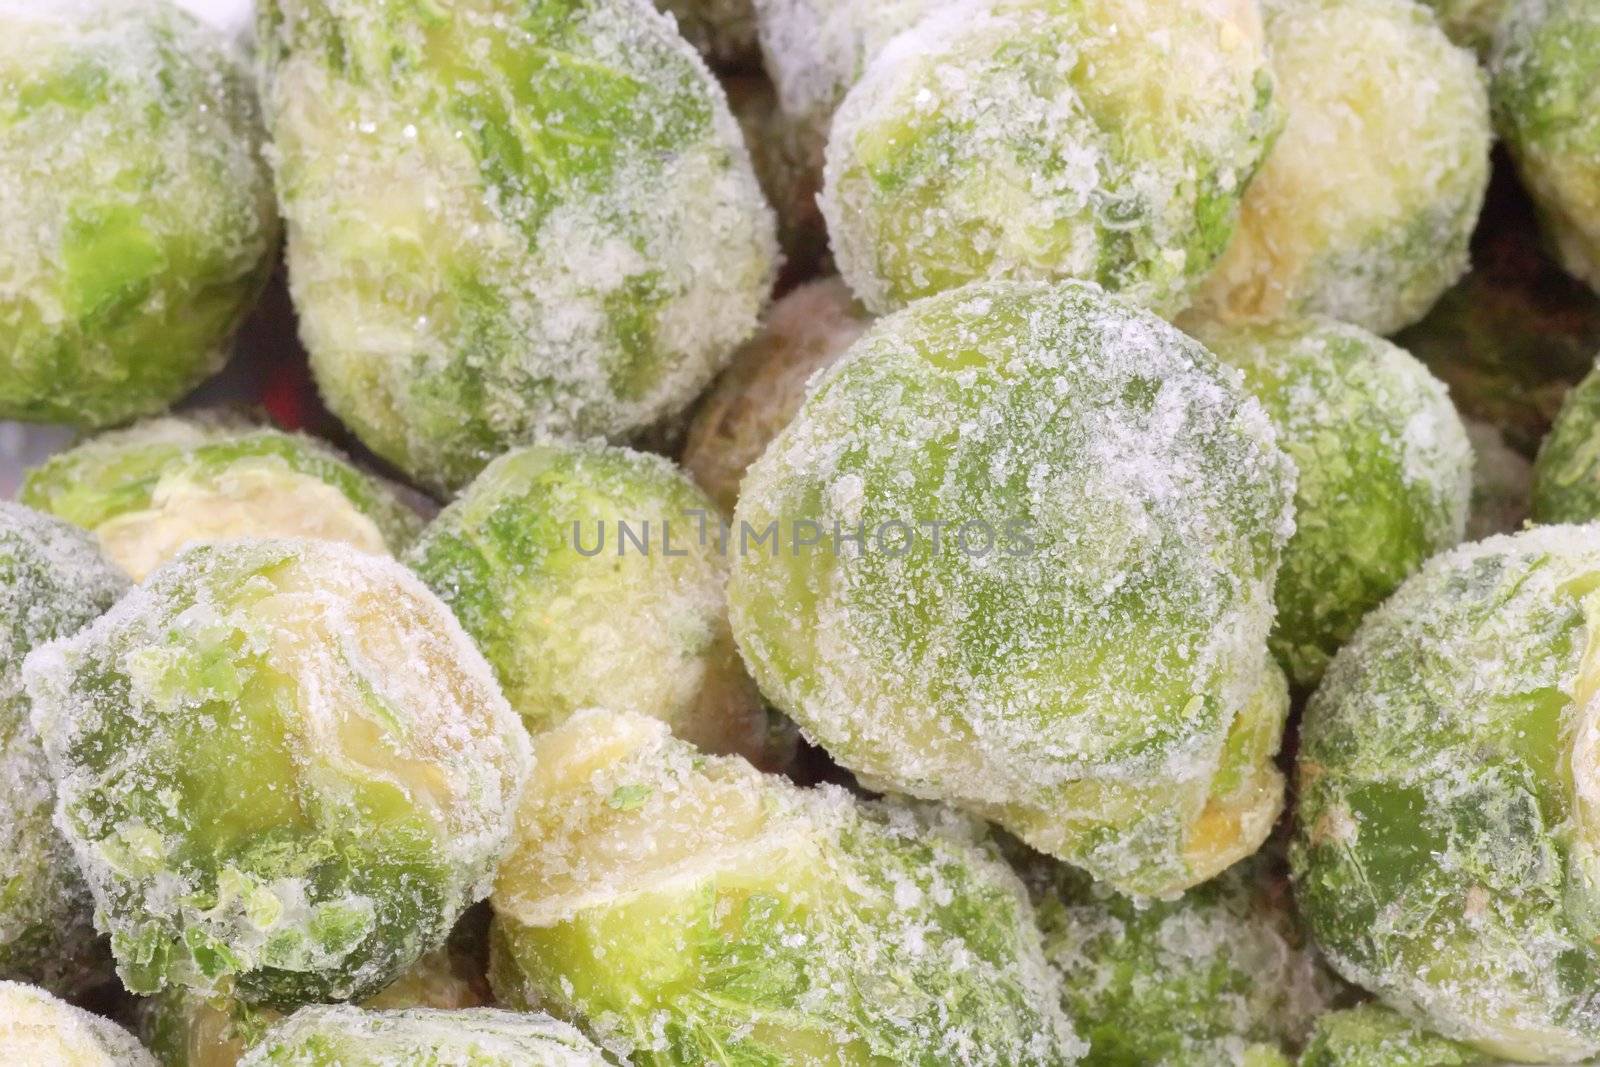 Frozen Brussels sprouts in detail as background